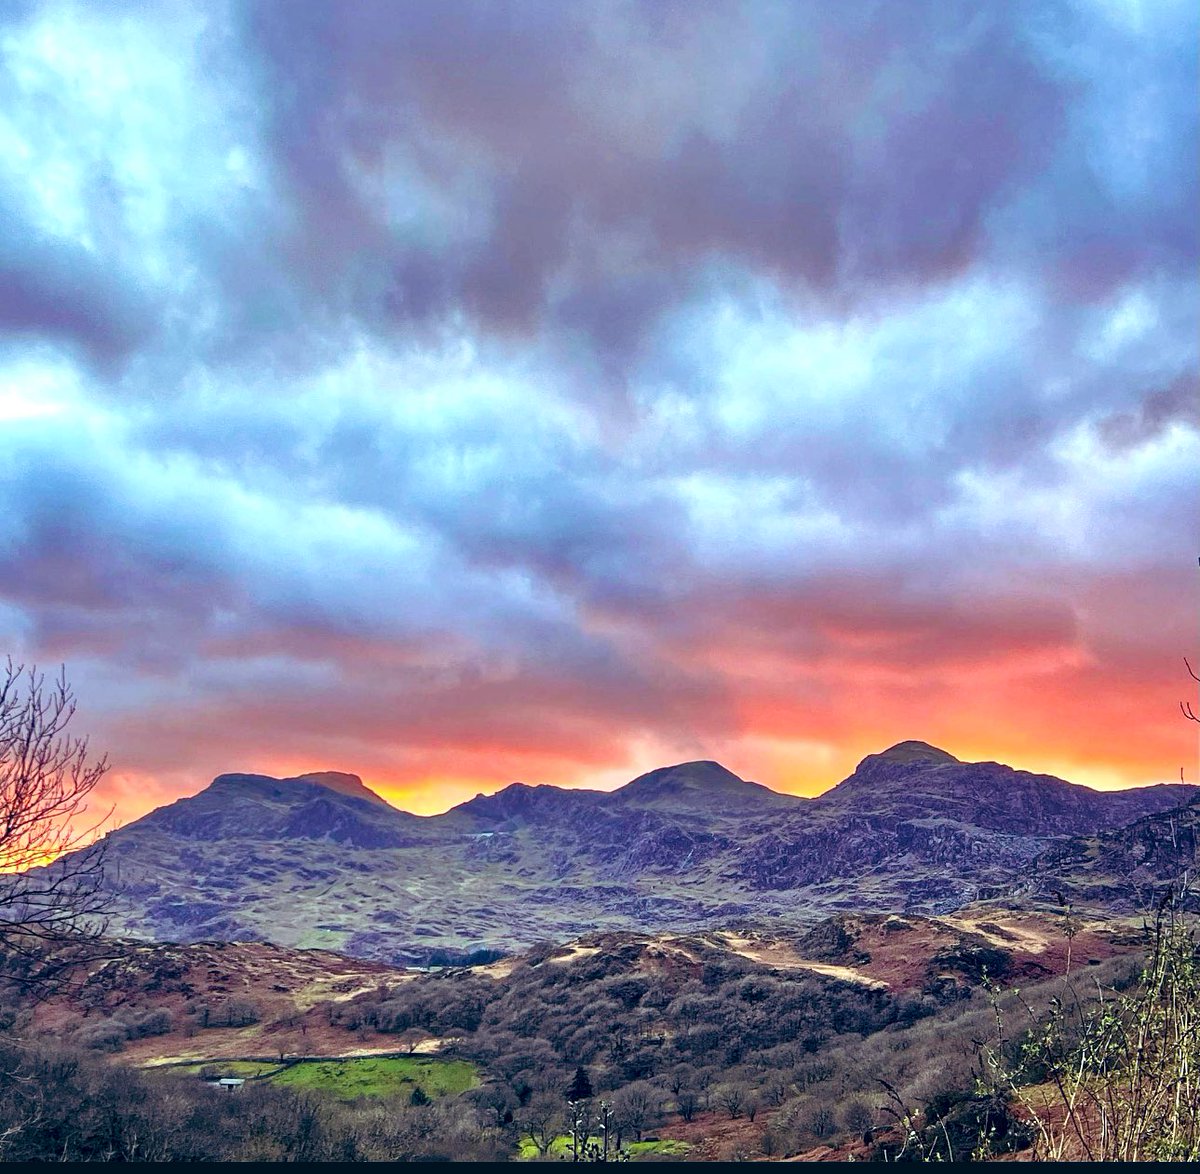 The view from my front door!! You can’t get better than that….. #northwales #wales #cymru #BlaenauFfestiniog